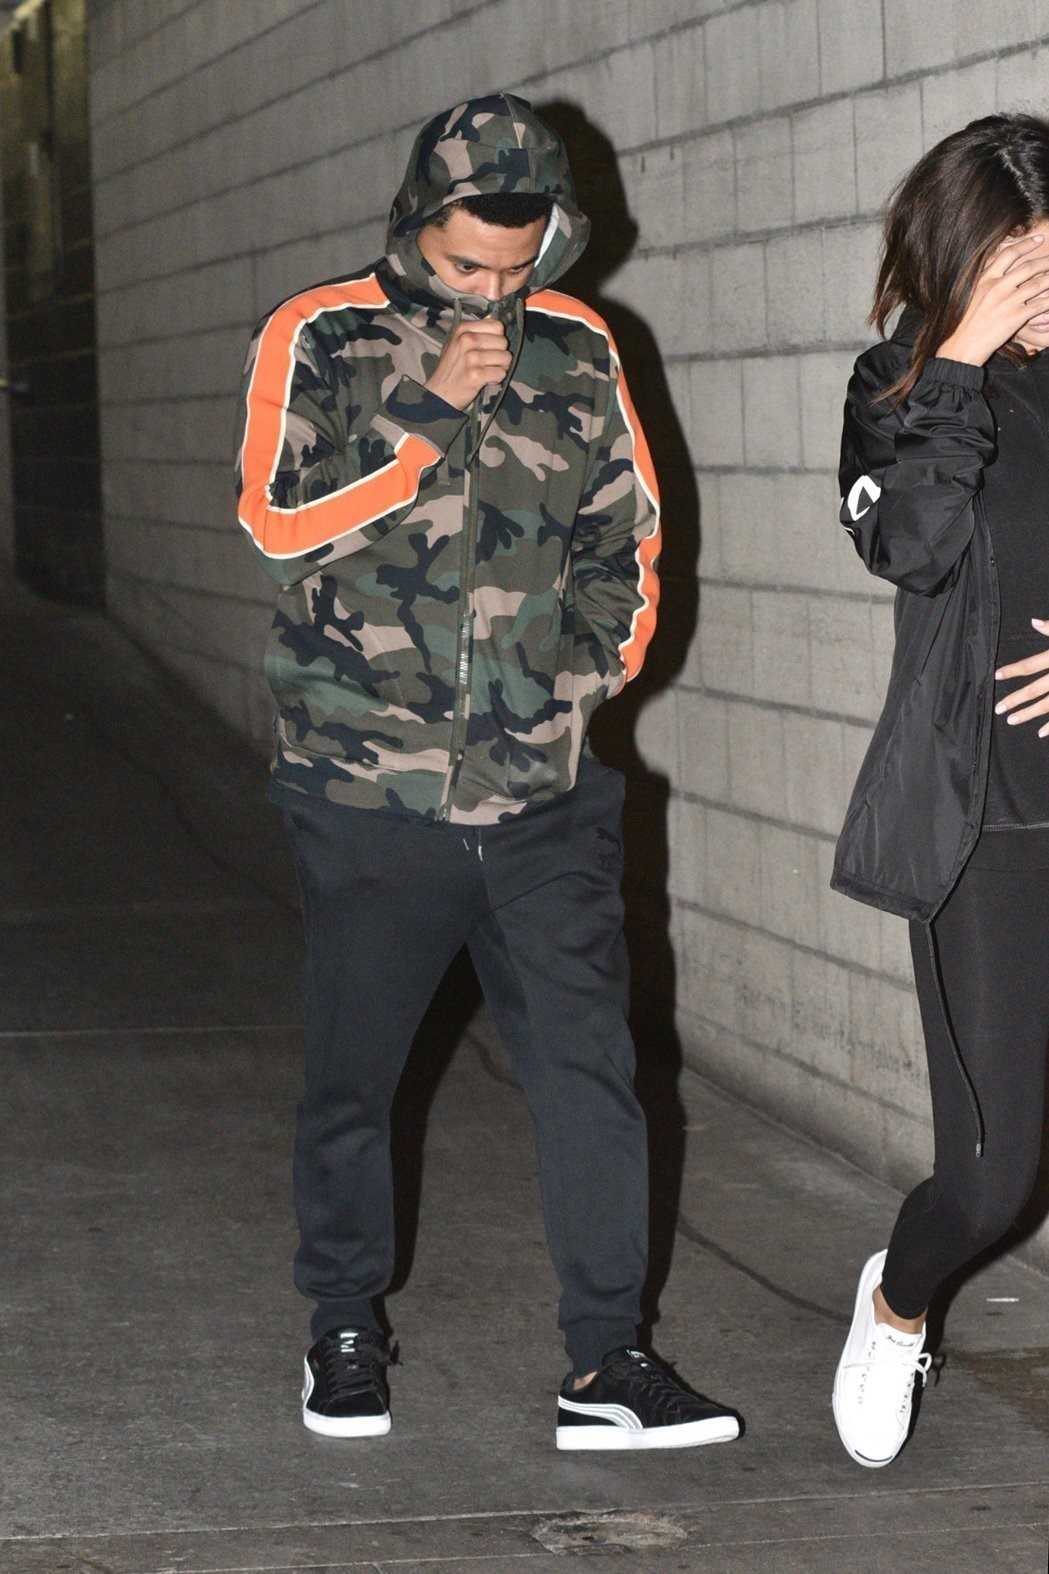 Selena_Gomez_-_At_The_Grove_with_The_Weeknd_in_West_Hollywood_on_June_16-03.jpg